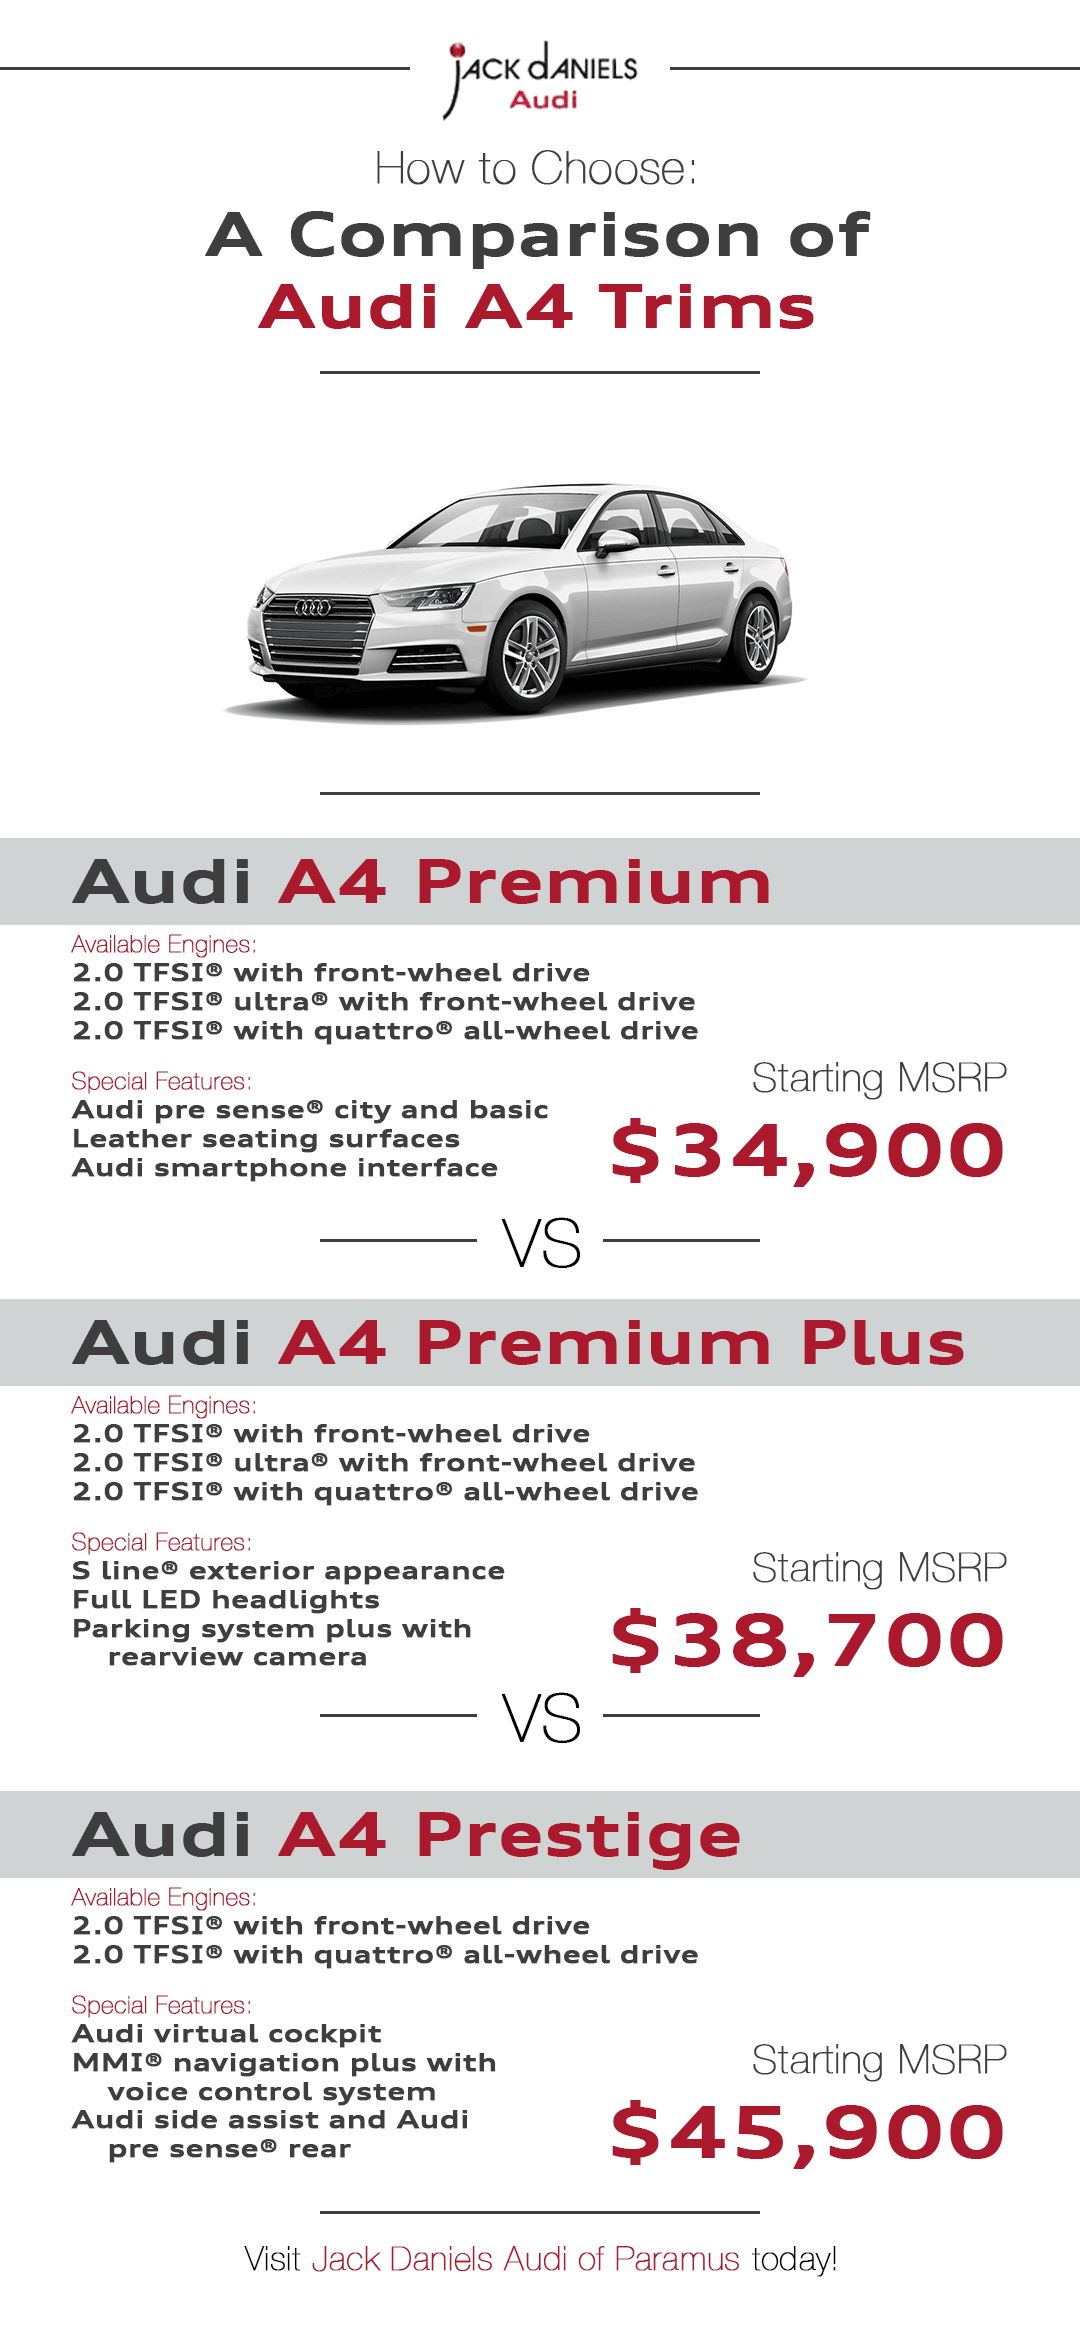 Audi A4 Infographic